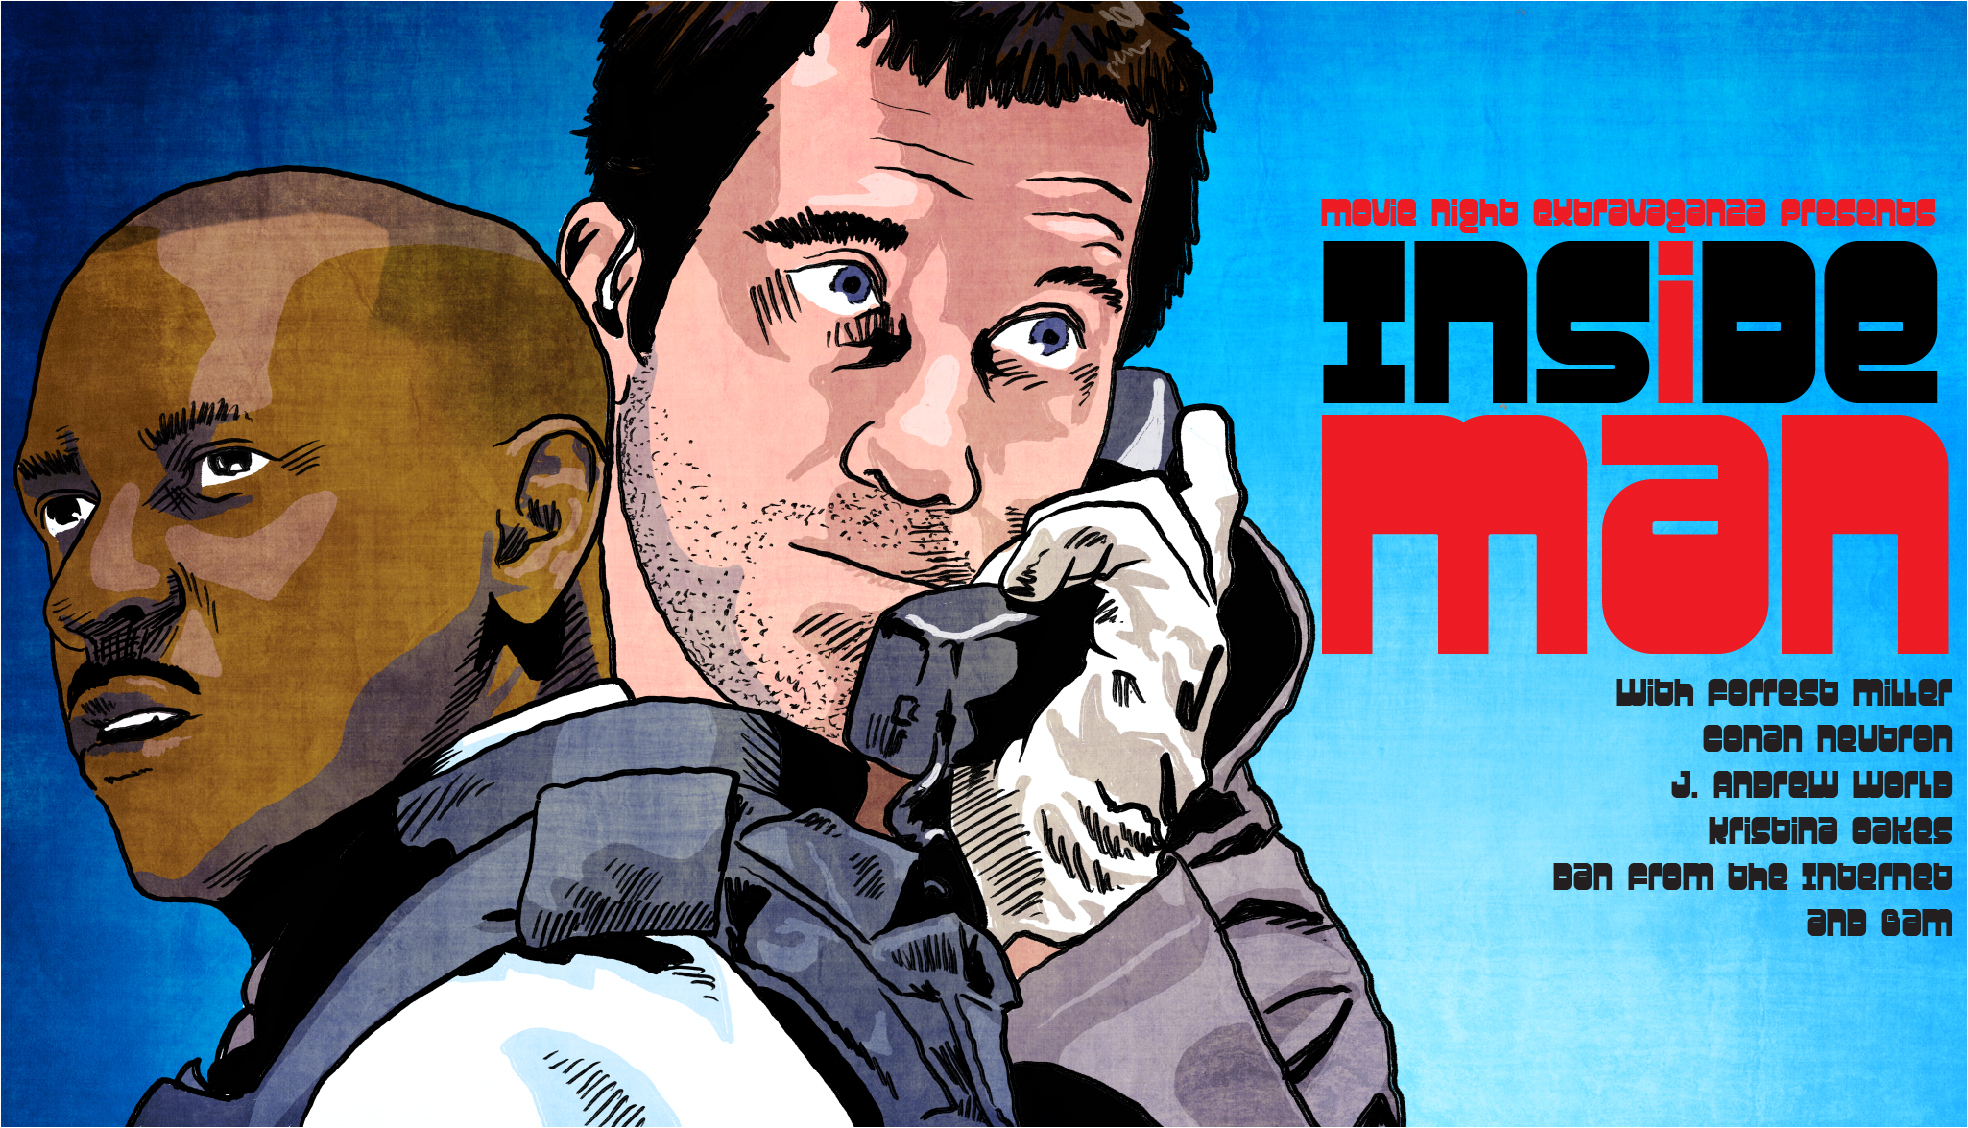 Episode 219: Inside Man with Dan from the Internet and Bam